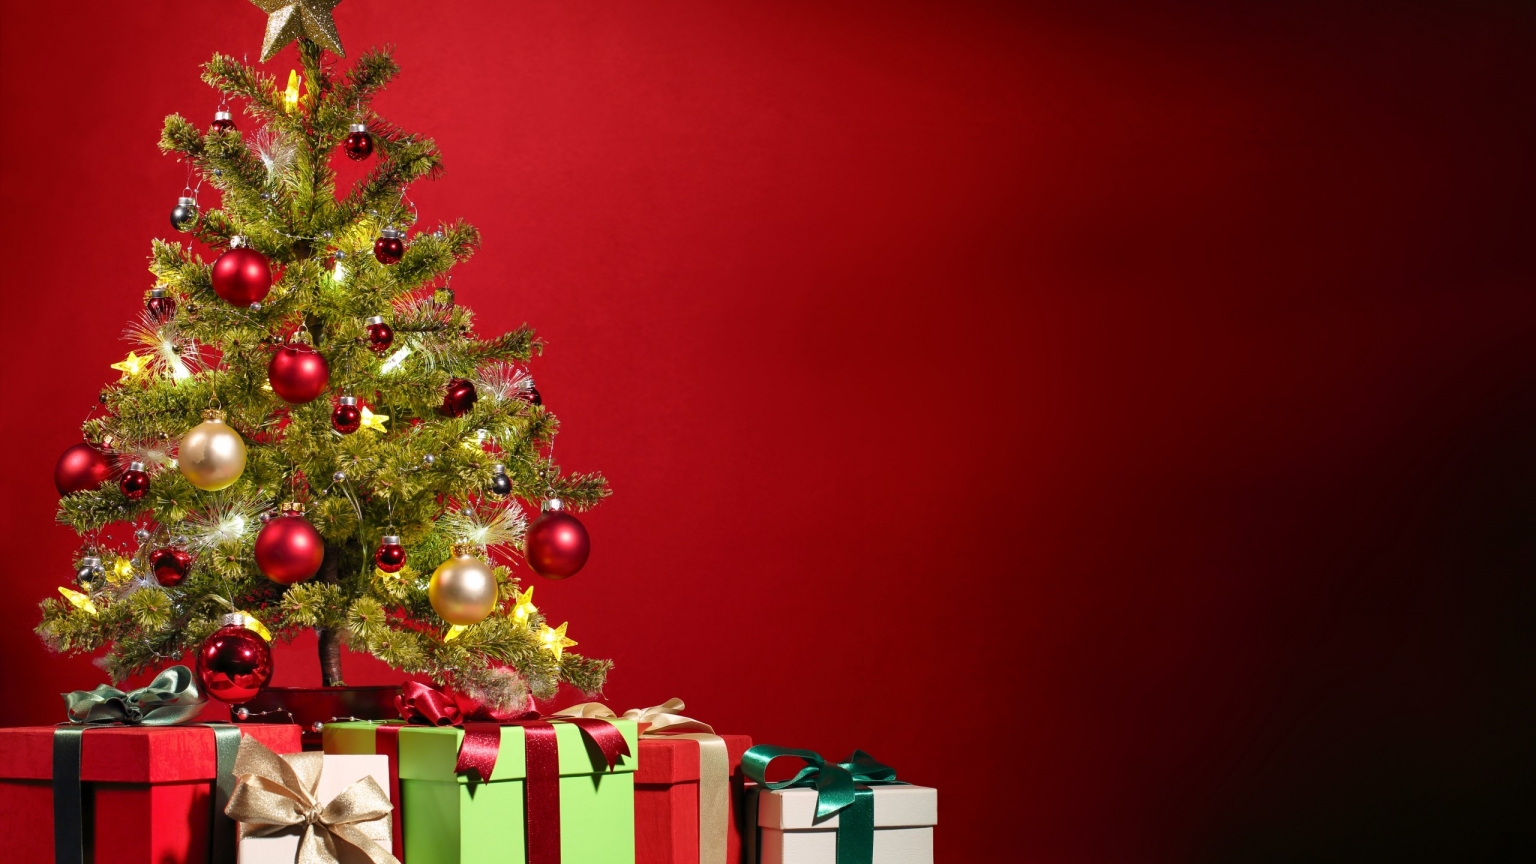 Special Christmas Tree and Gifts for 1536 x 864 HDTV resolution